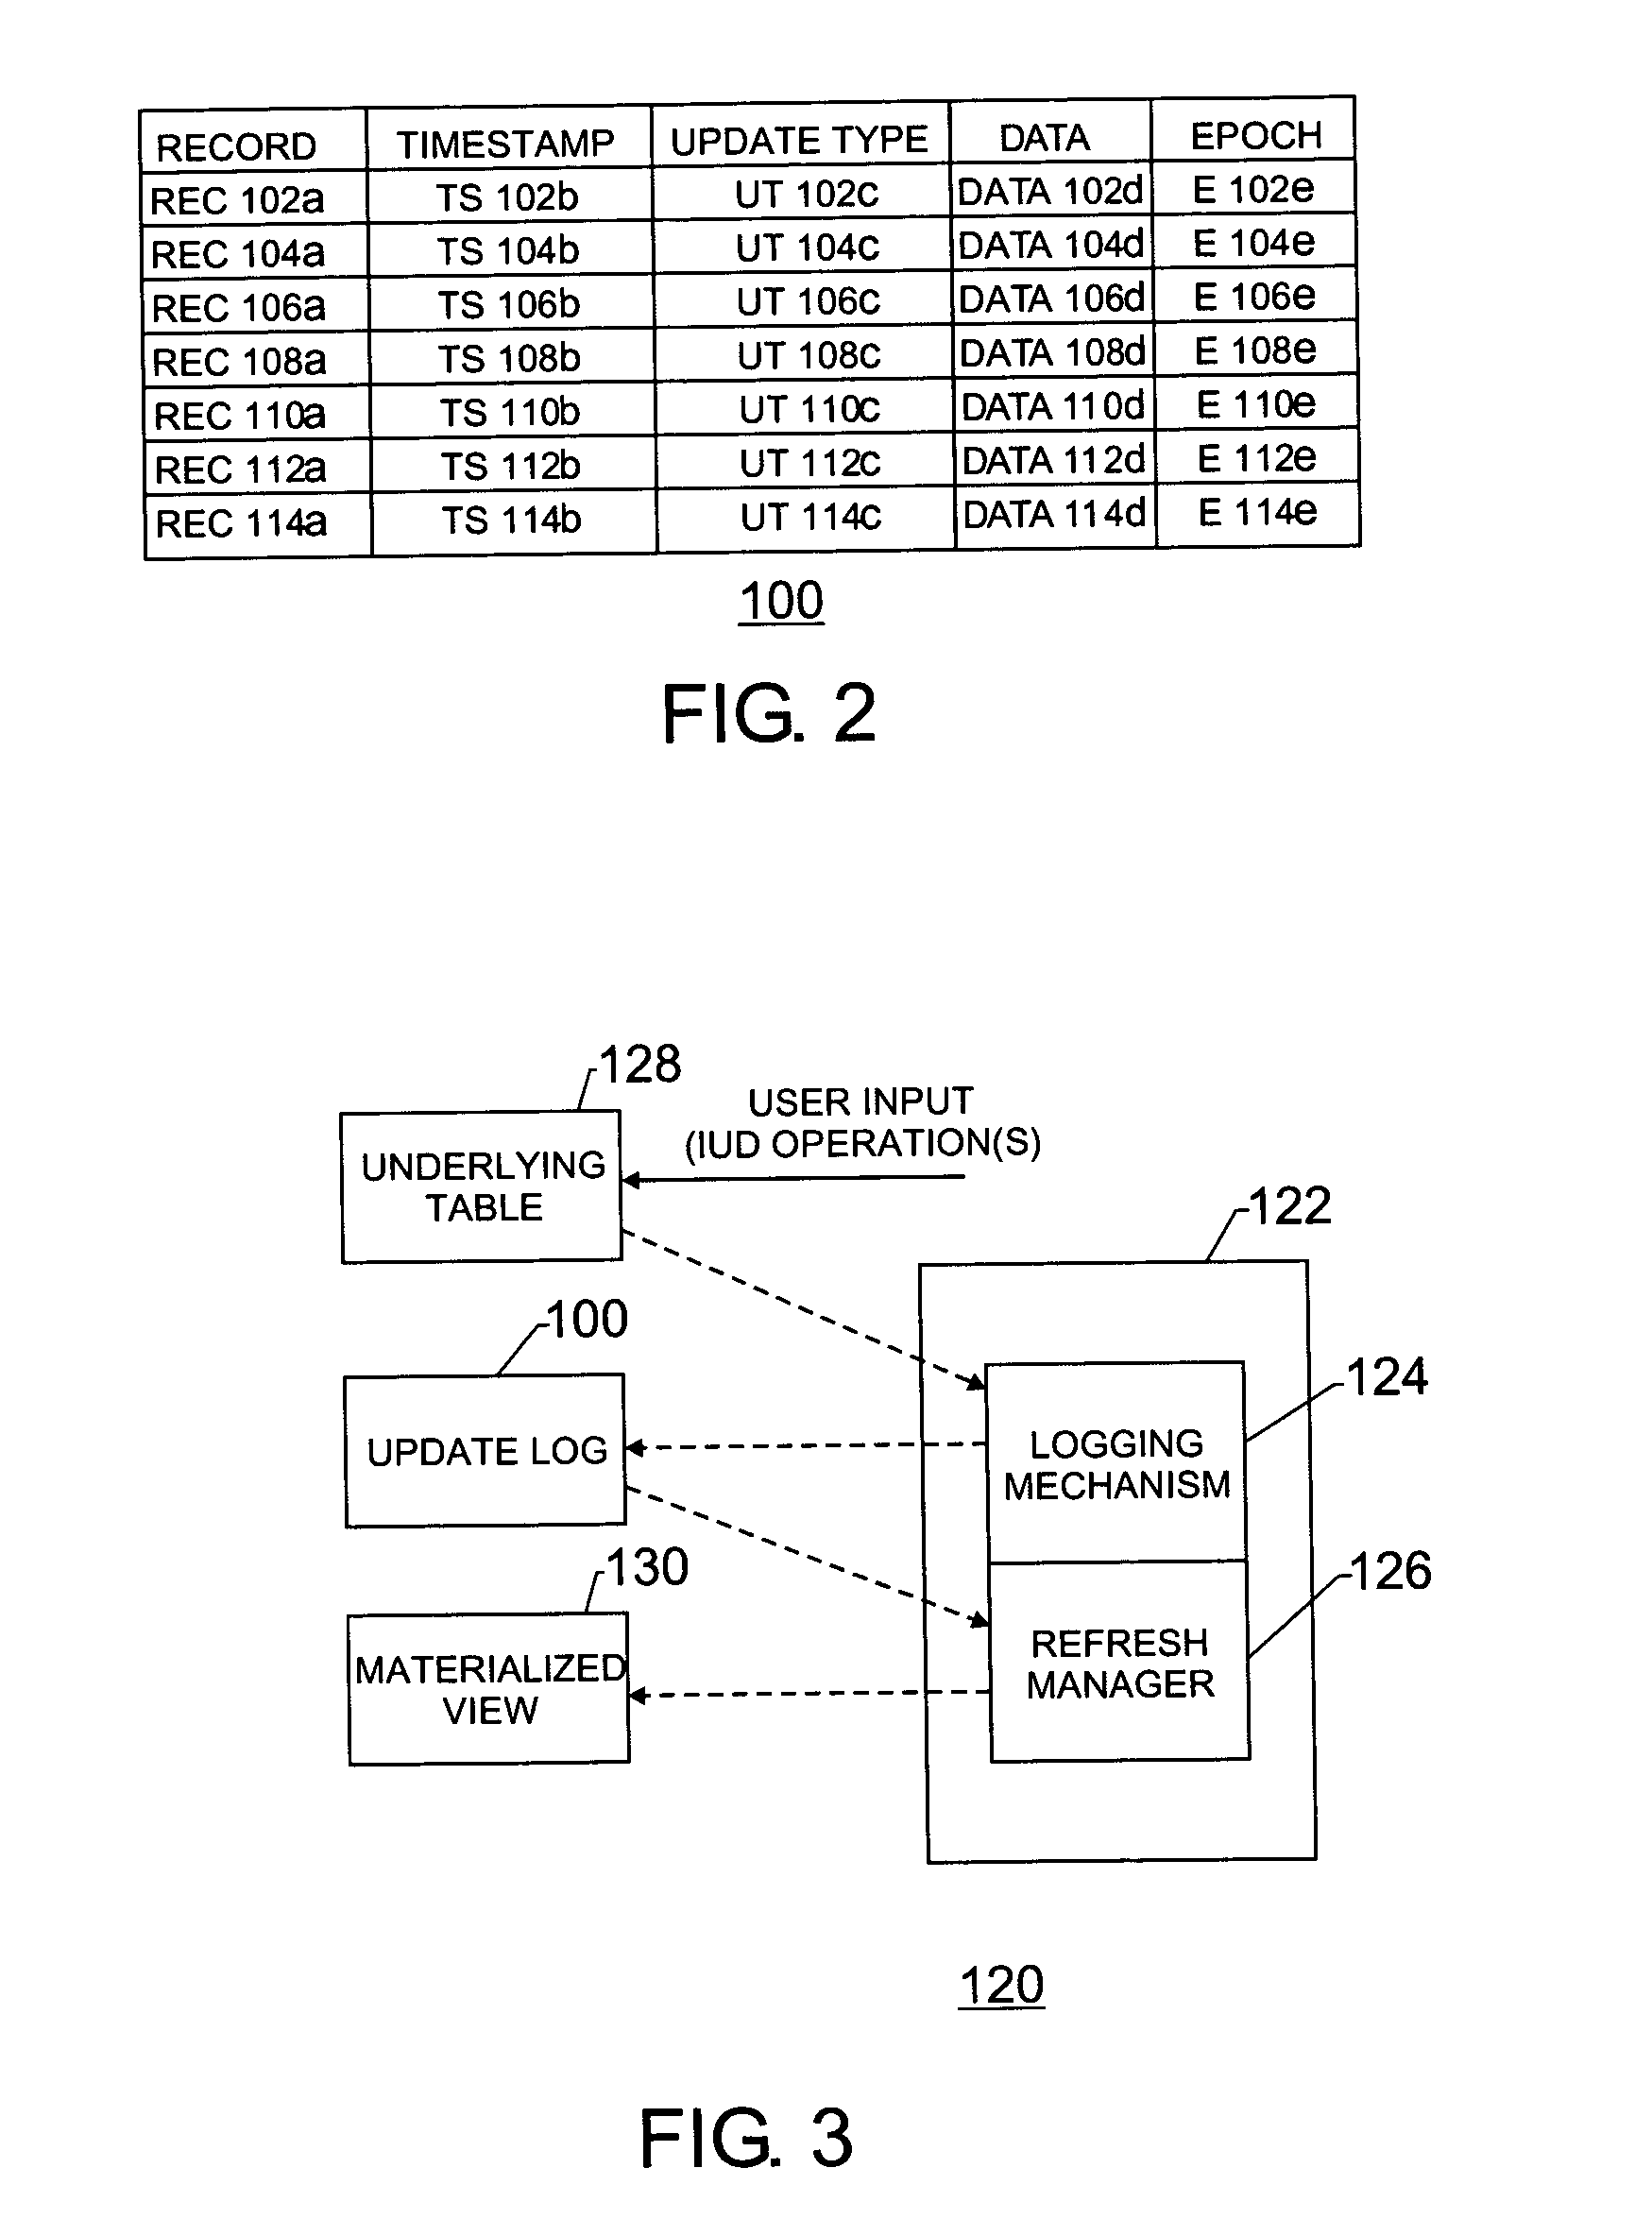 Method and apparatus for refreshing materialized views